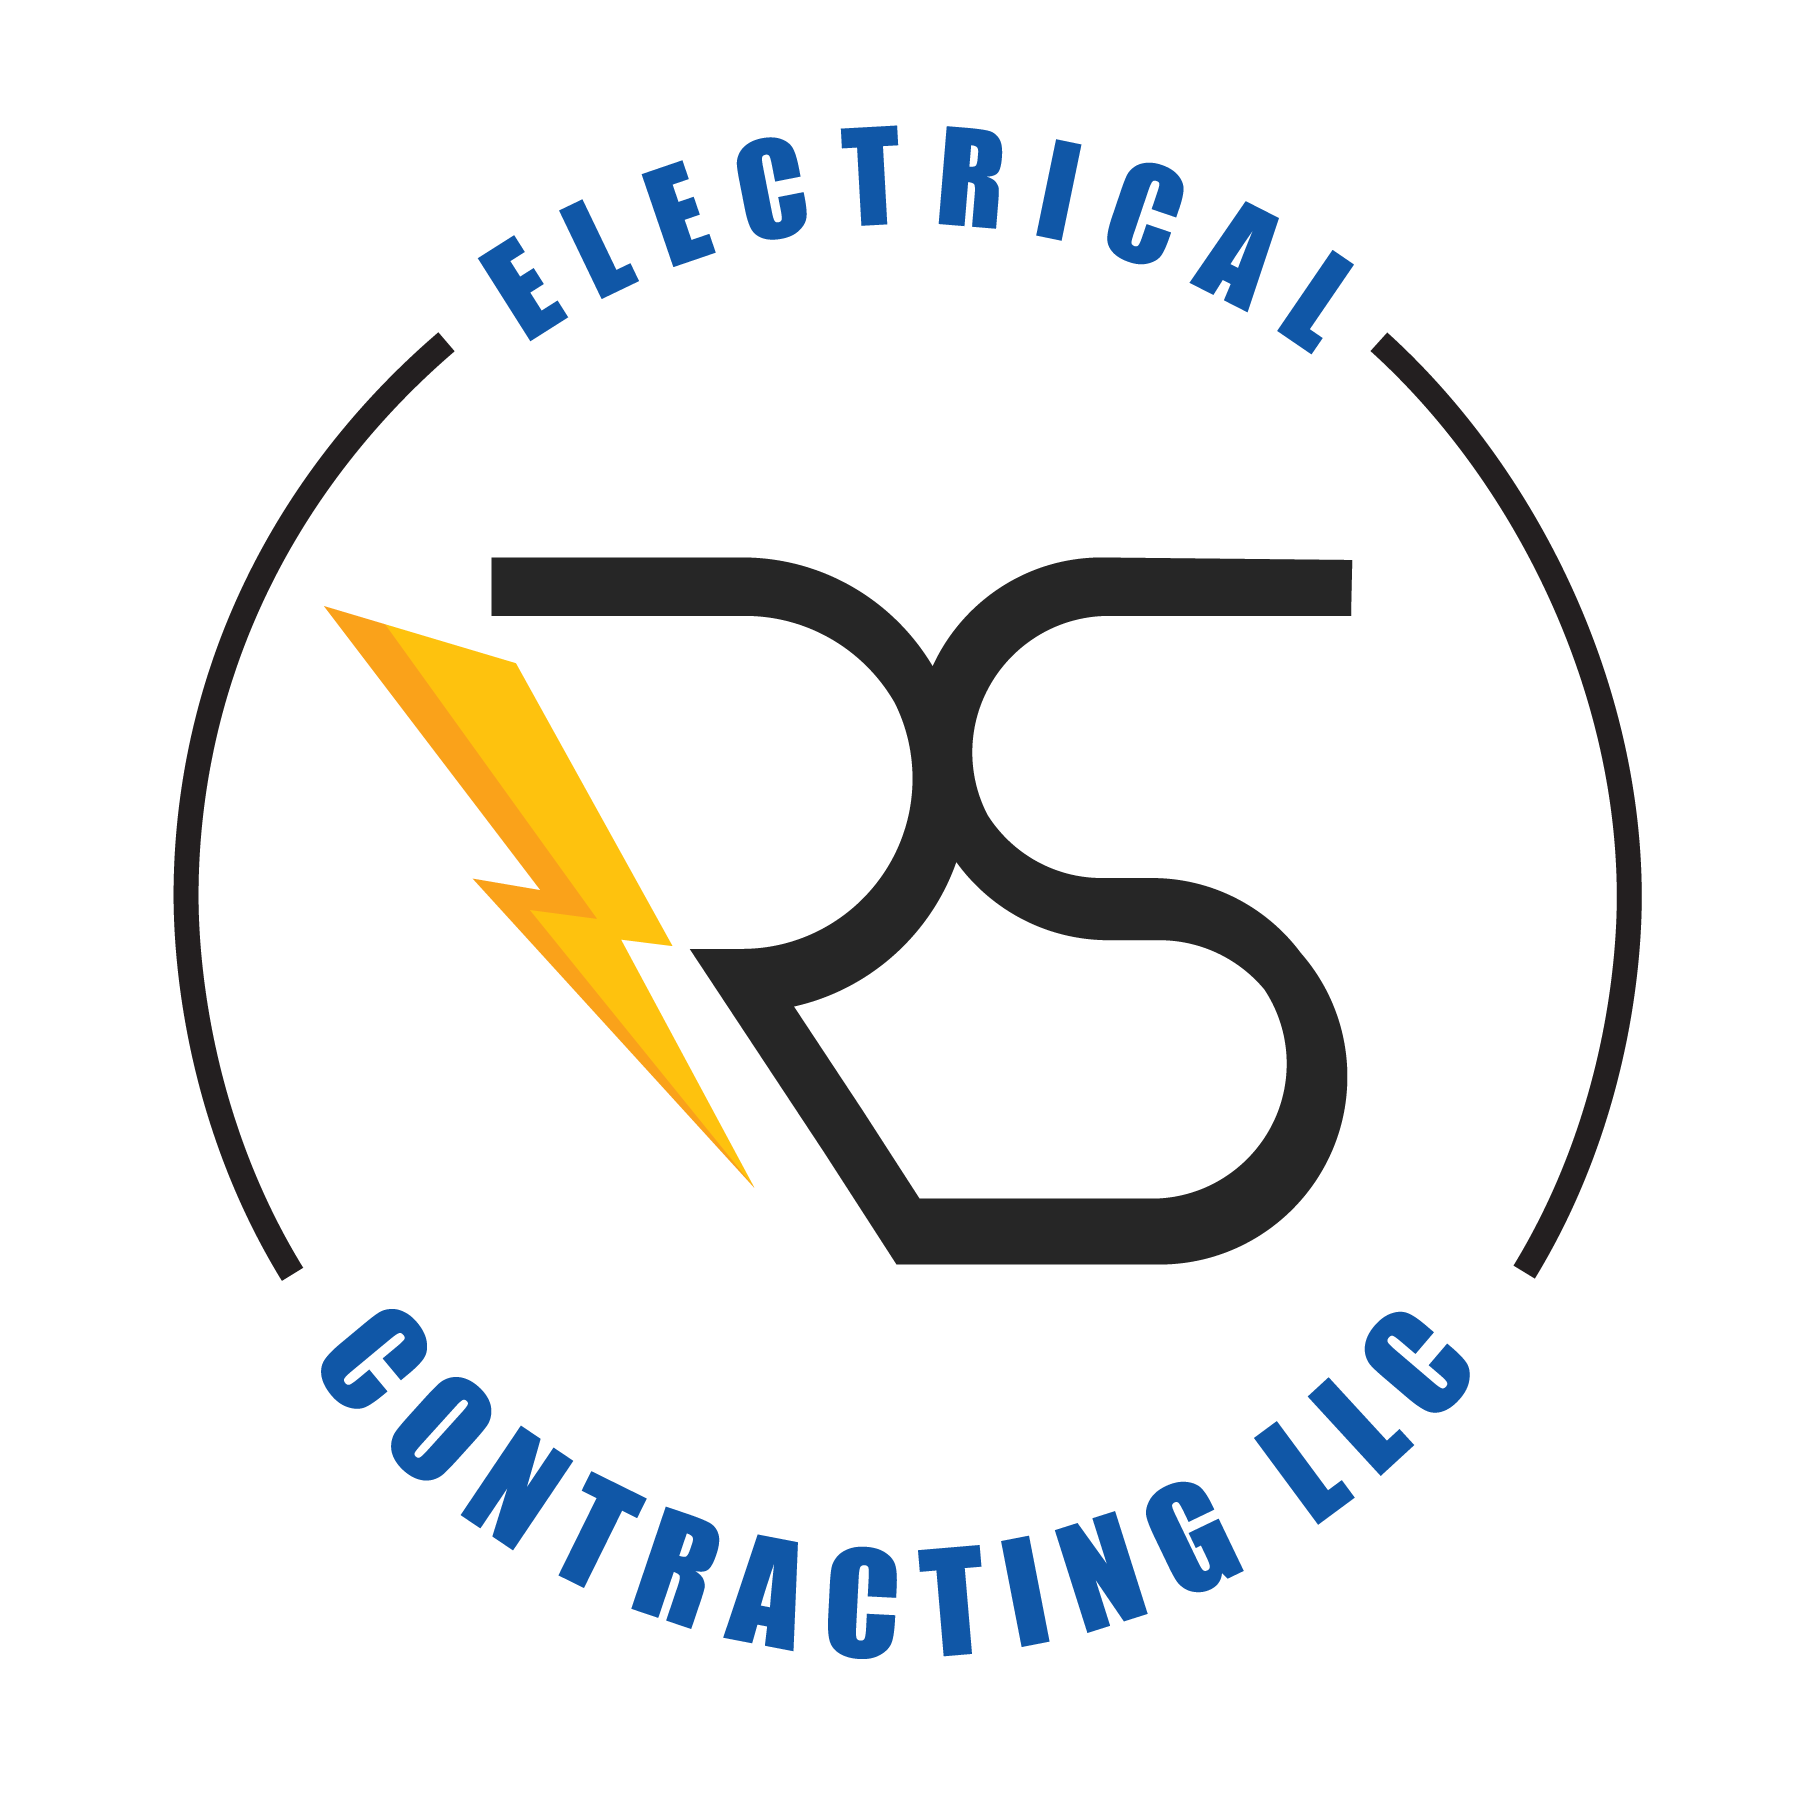 R&S Electrical Contracting LLC - Derby, NY - (716)949-1558 | ShowMeLocal.com